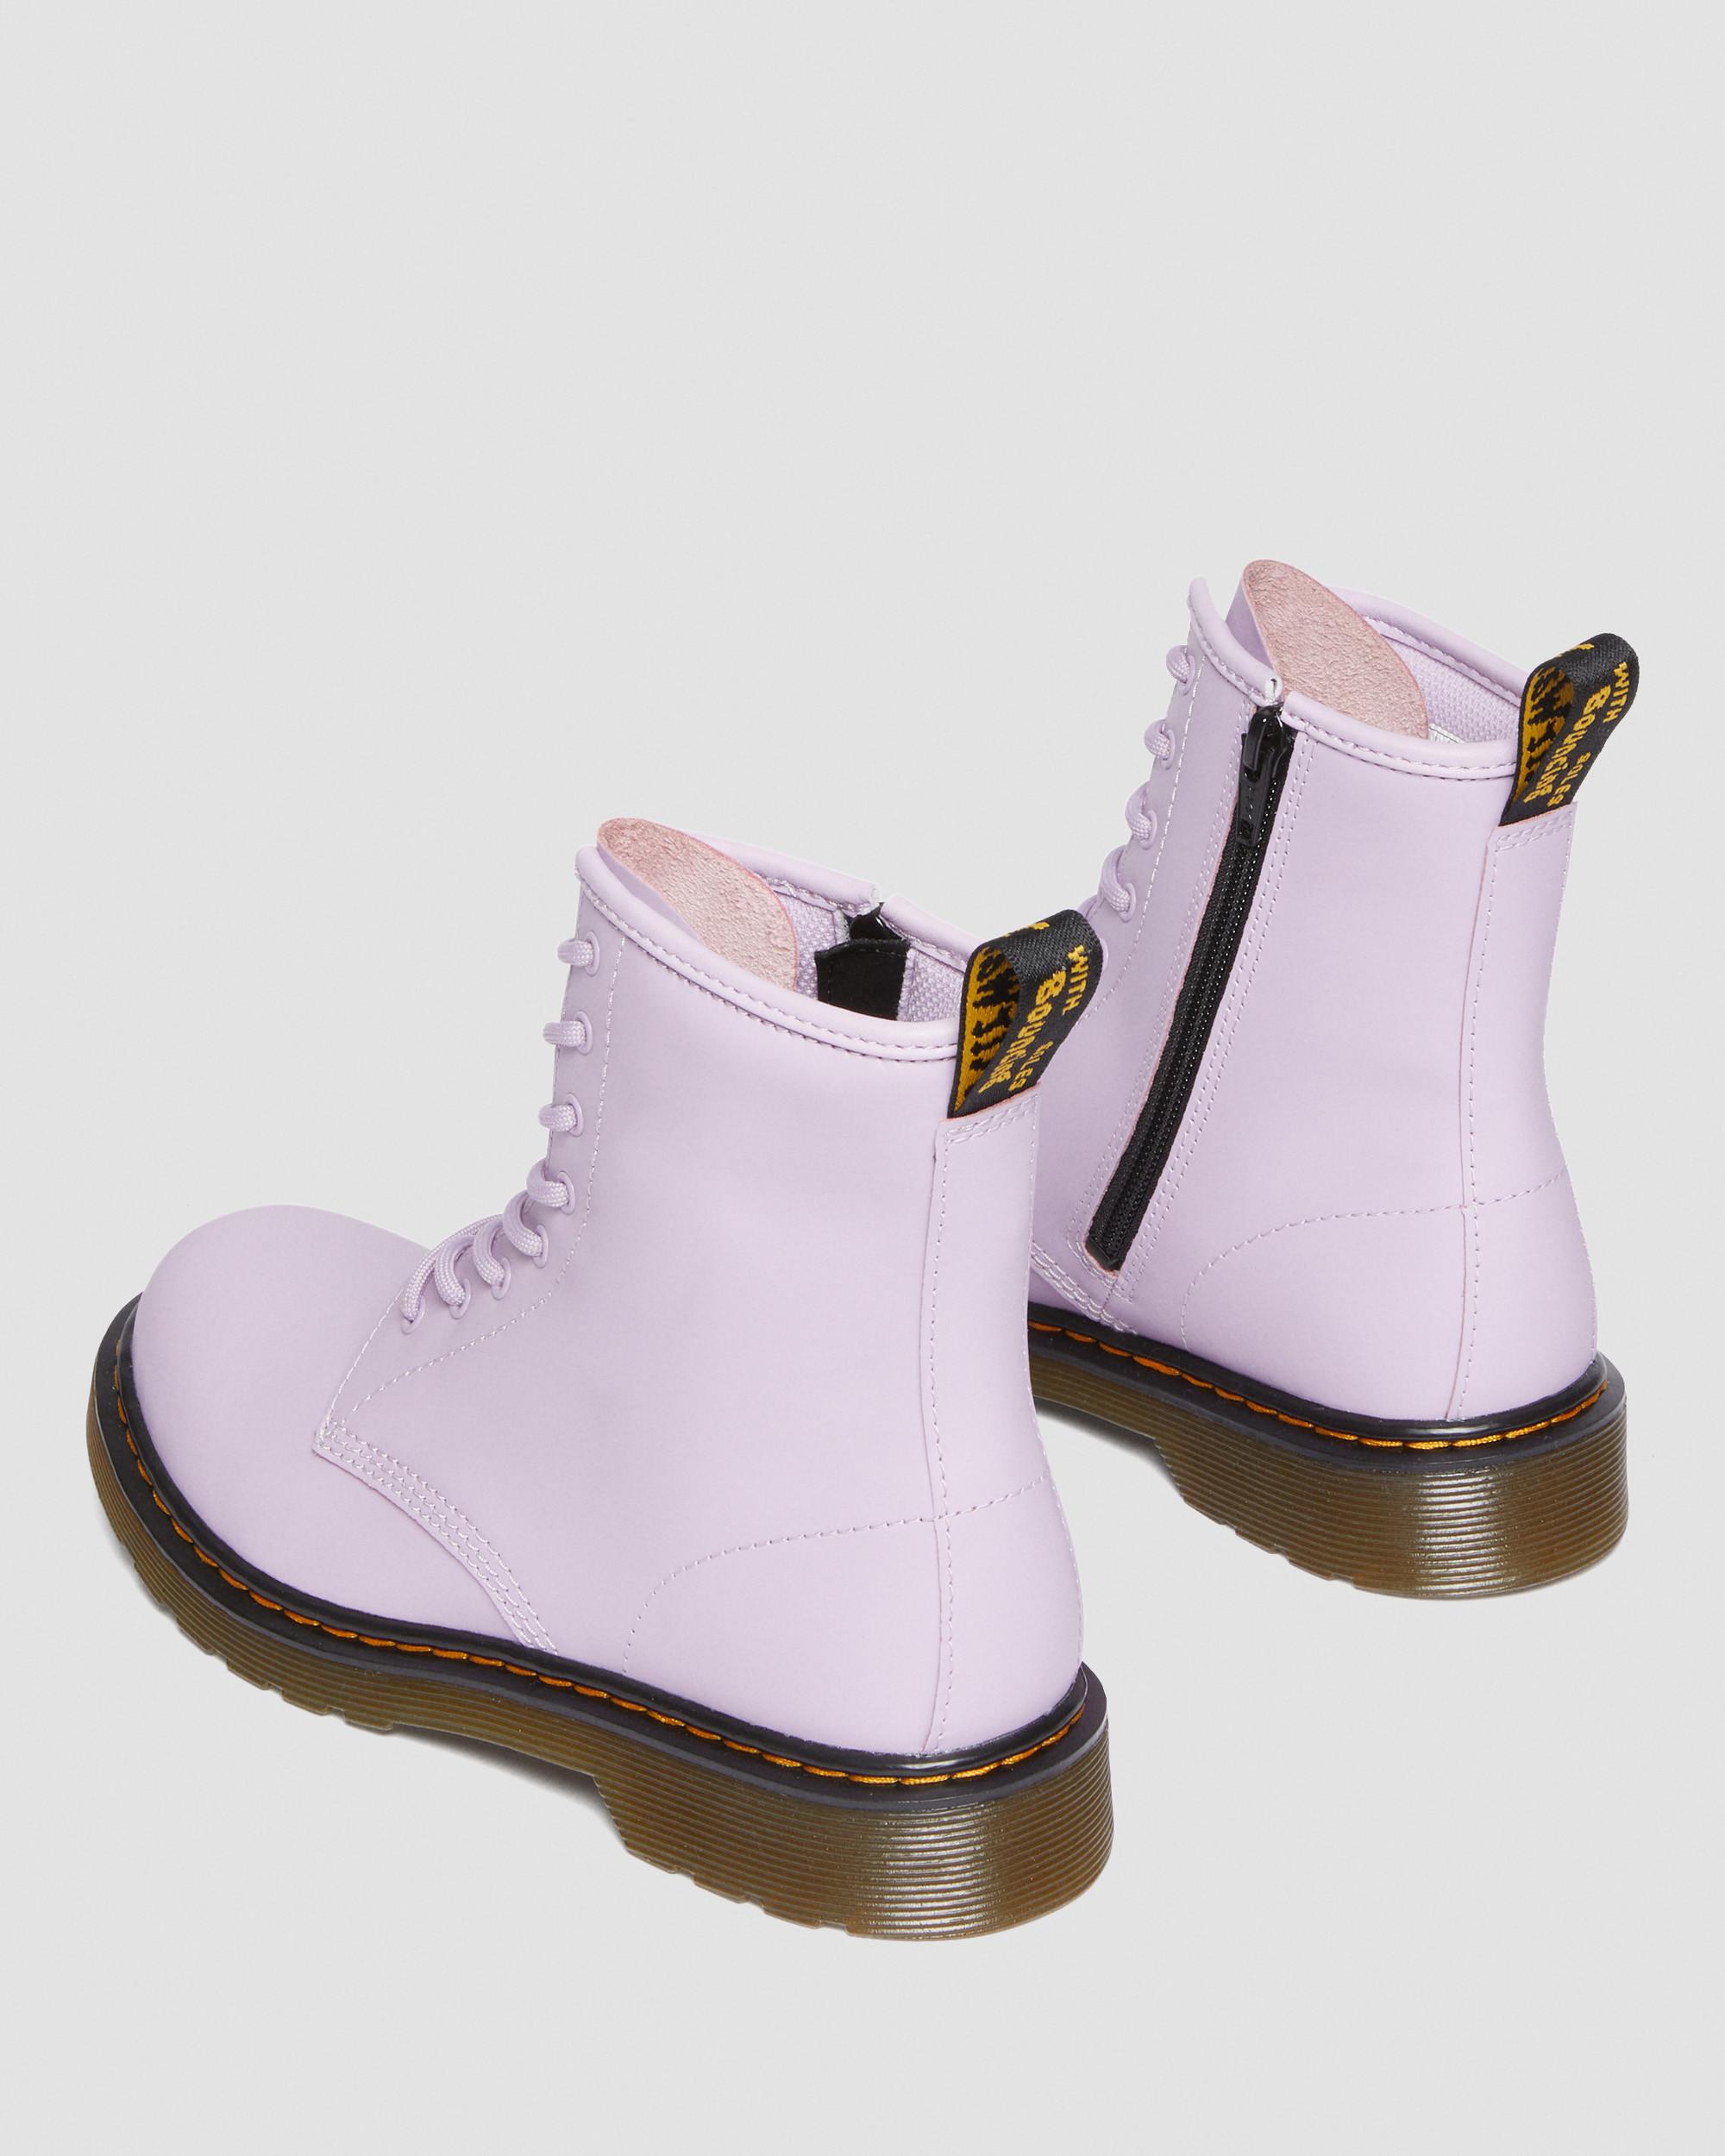 Youth in 1460 Lace | Leather Romario Lilac Martens Up Boots Dr.